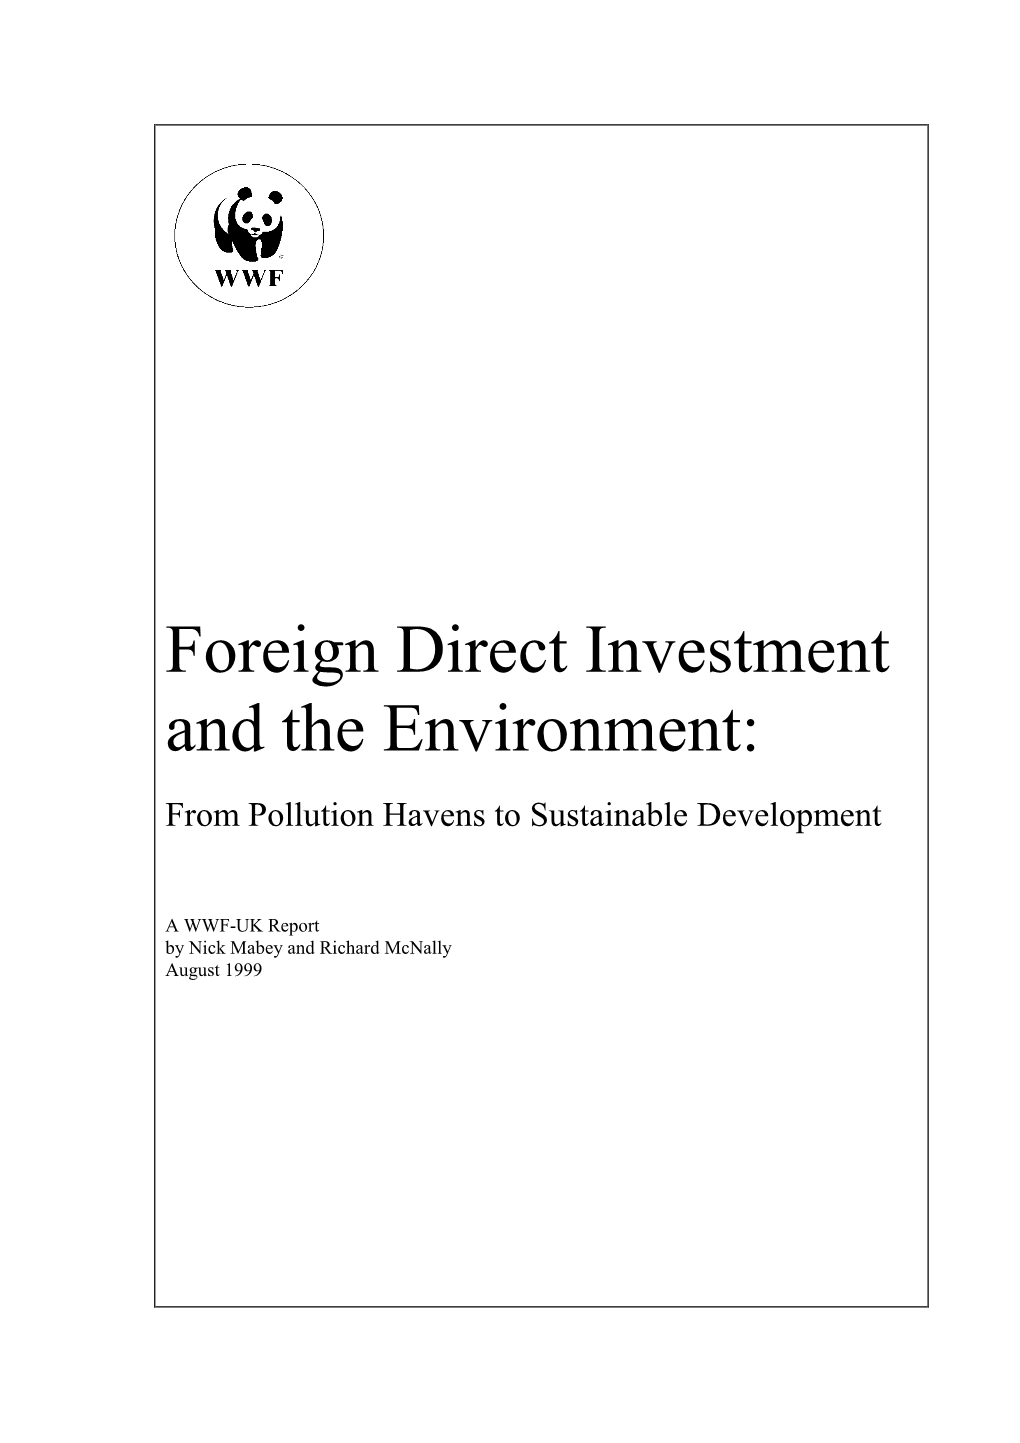 Foreign Direct Investment and the Environment: from Pollution Havens to Sustainable Development